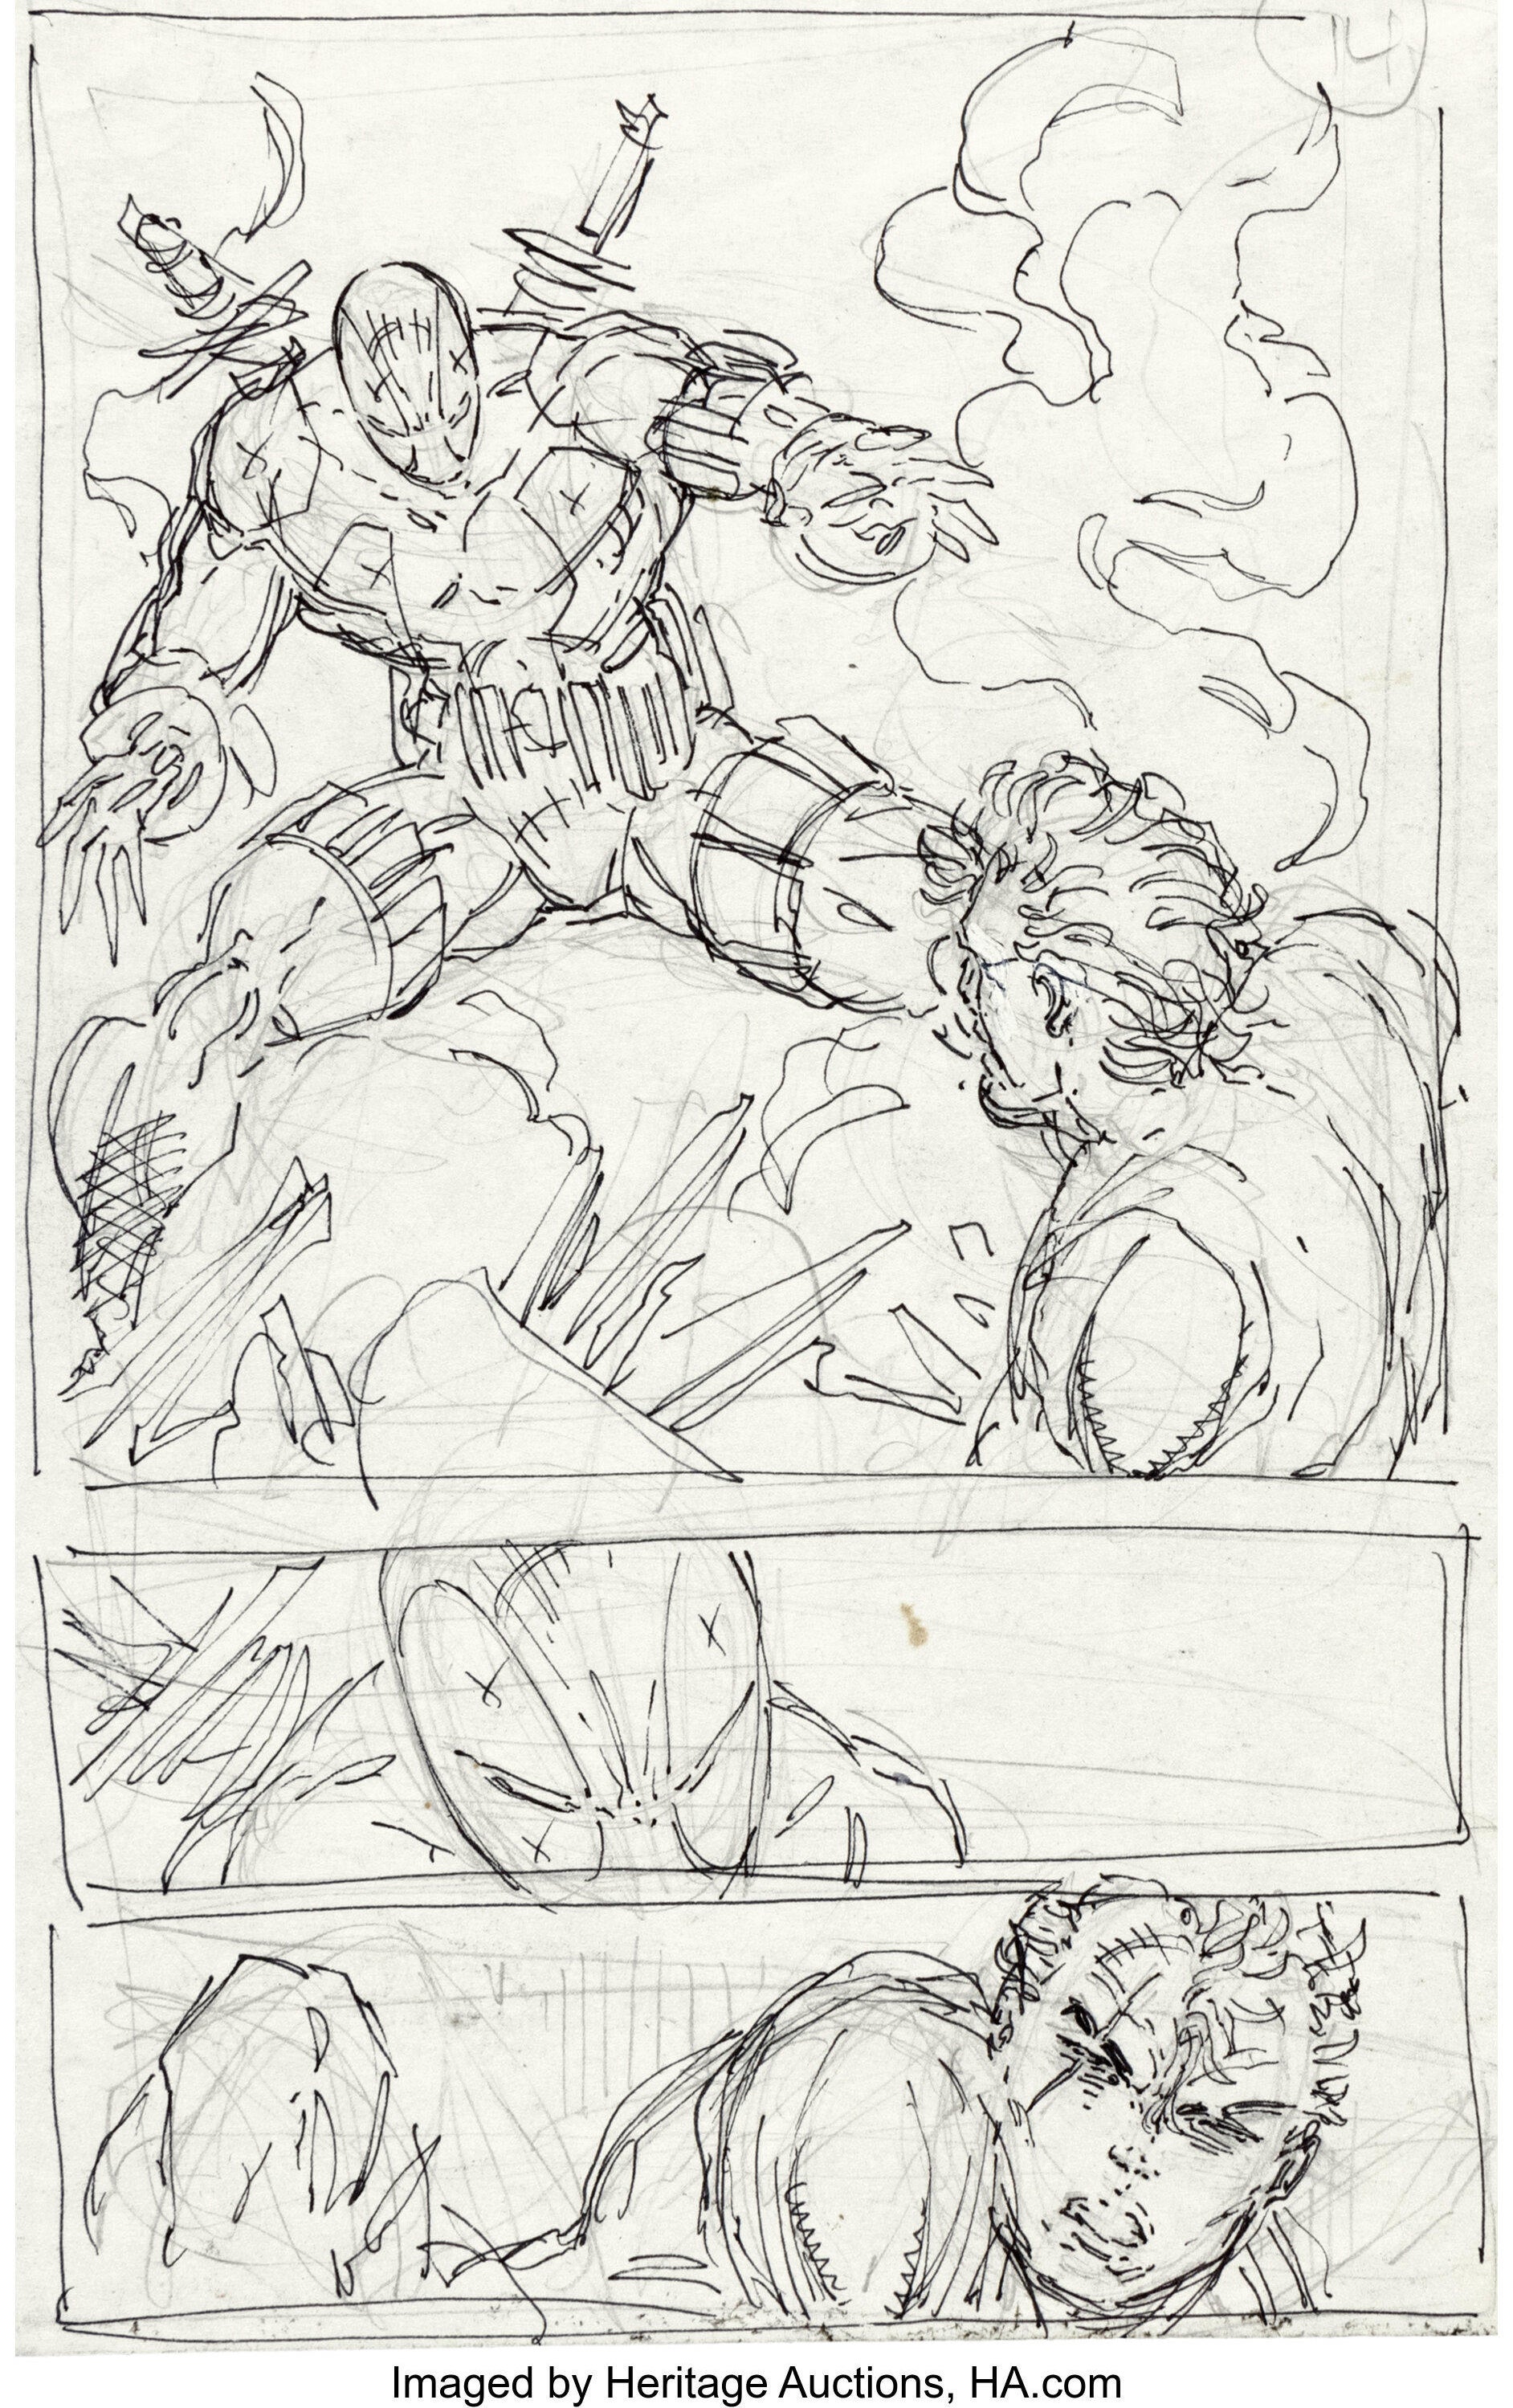 rob-liefeld-the-new-mutants-98-story-page-14-deadpools-first-appearance-preliminary-original-art-heritage-auctions.jpg